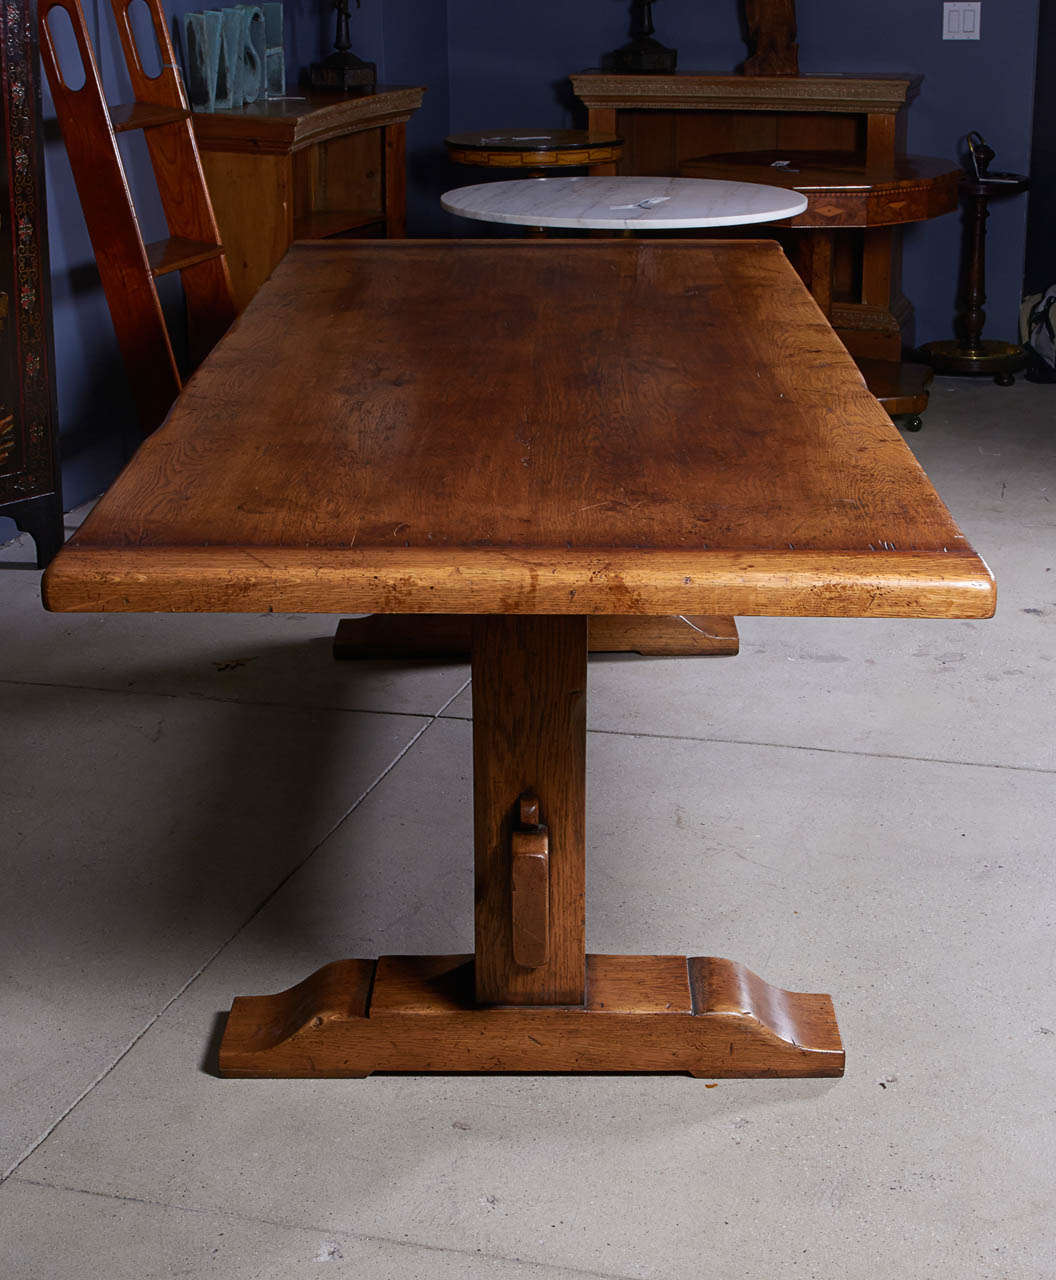 An Oak Dining Table with bread board ends and trestle supports.

Ask us about our reduced-rate shipping plans.